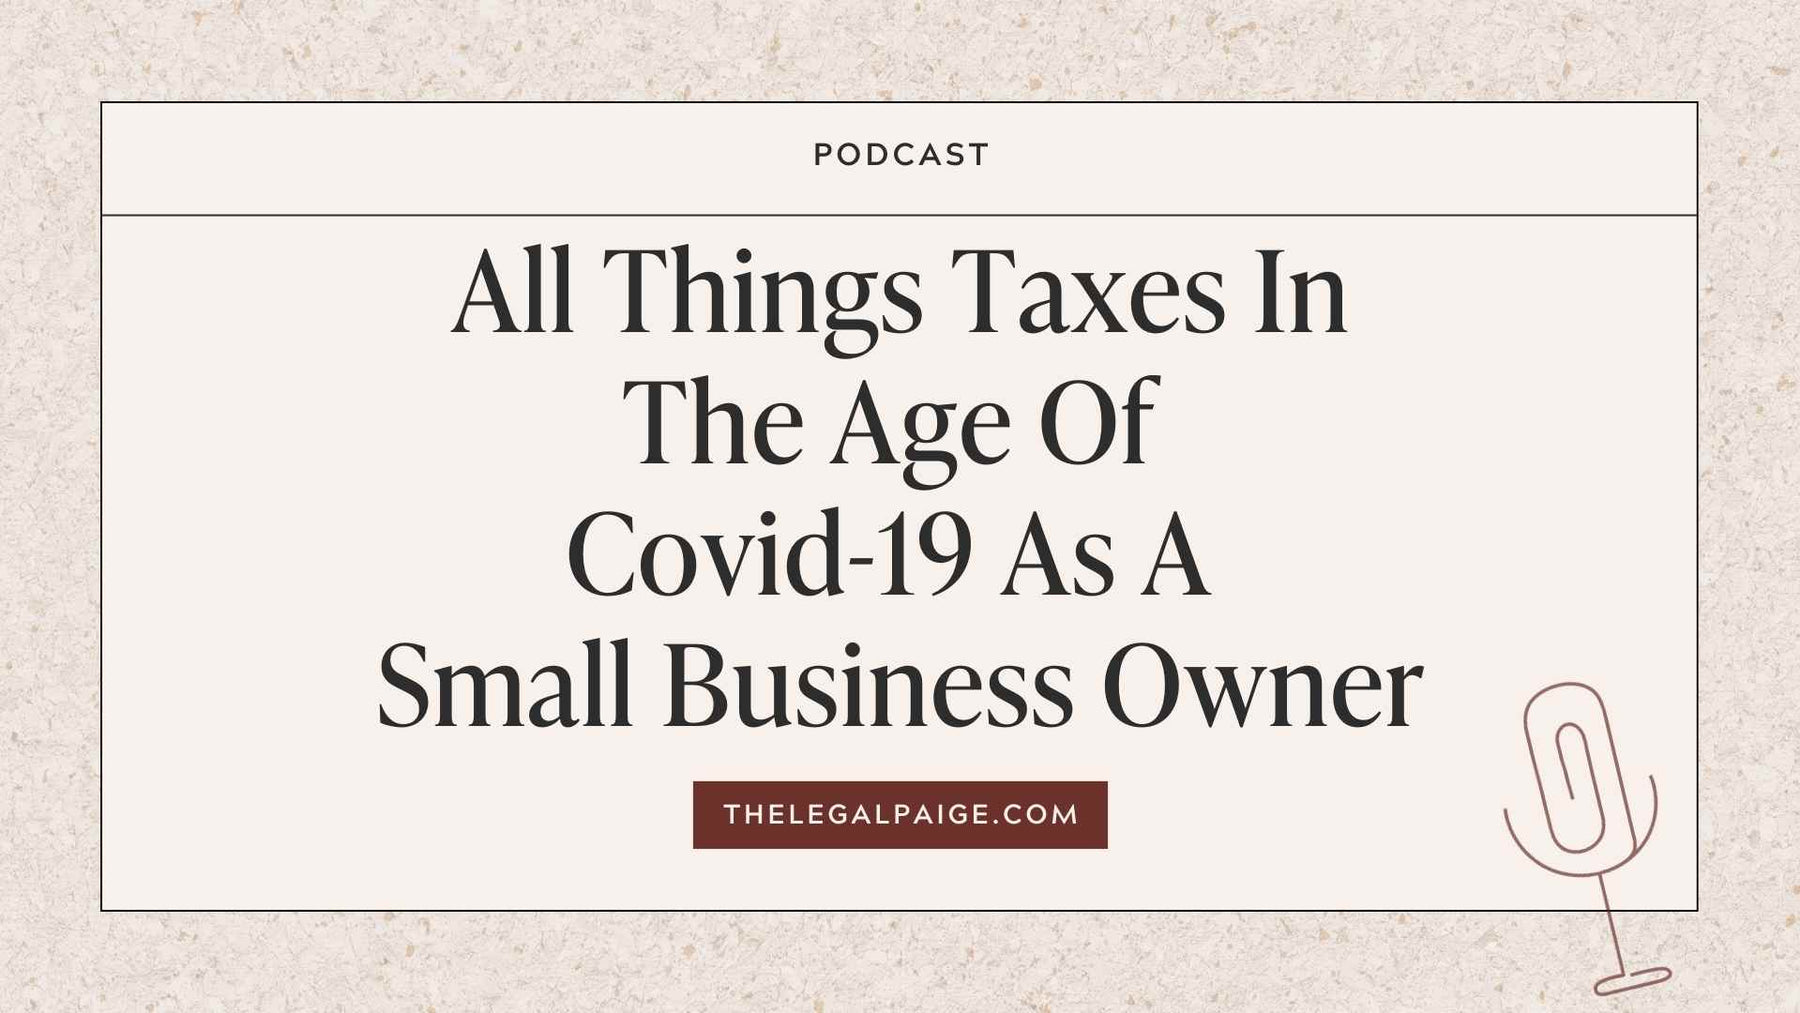 Episode 58:  All Things Taxes In The Age Of Covid-19 As A Small Business Owner